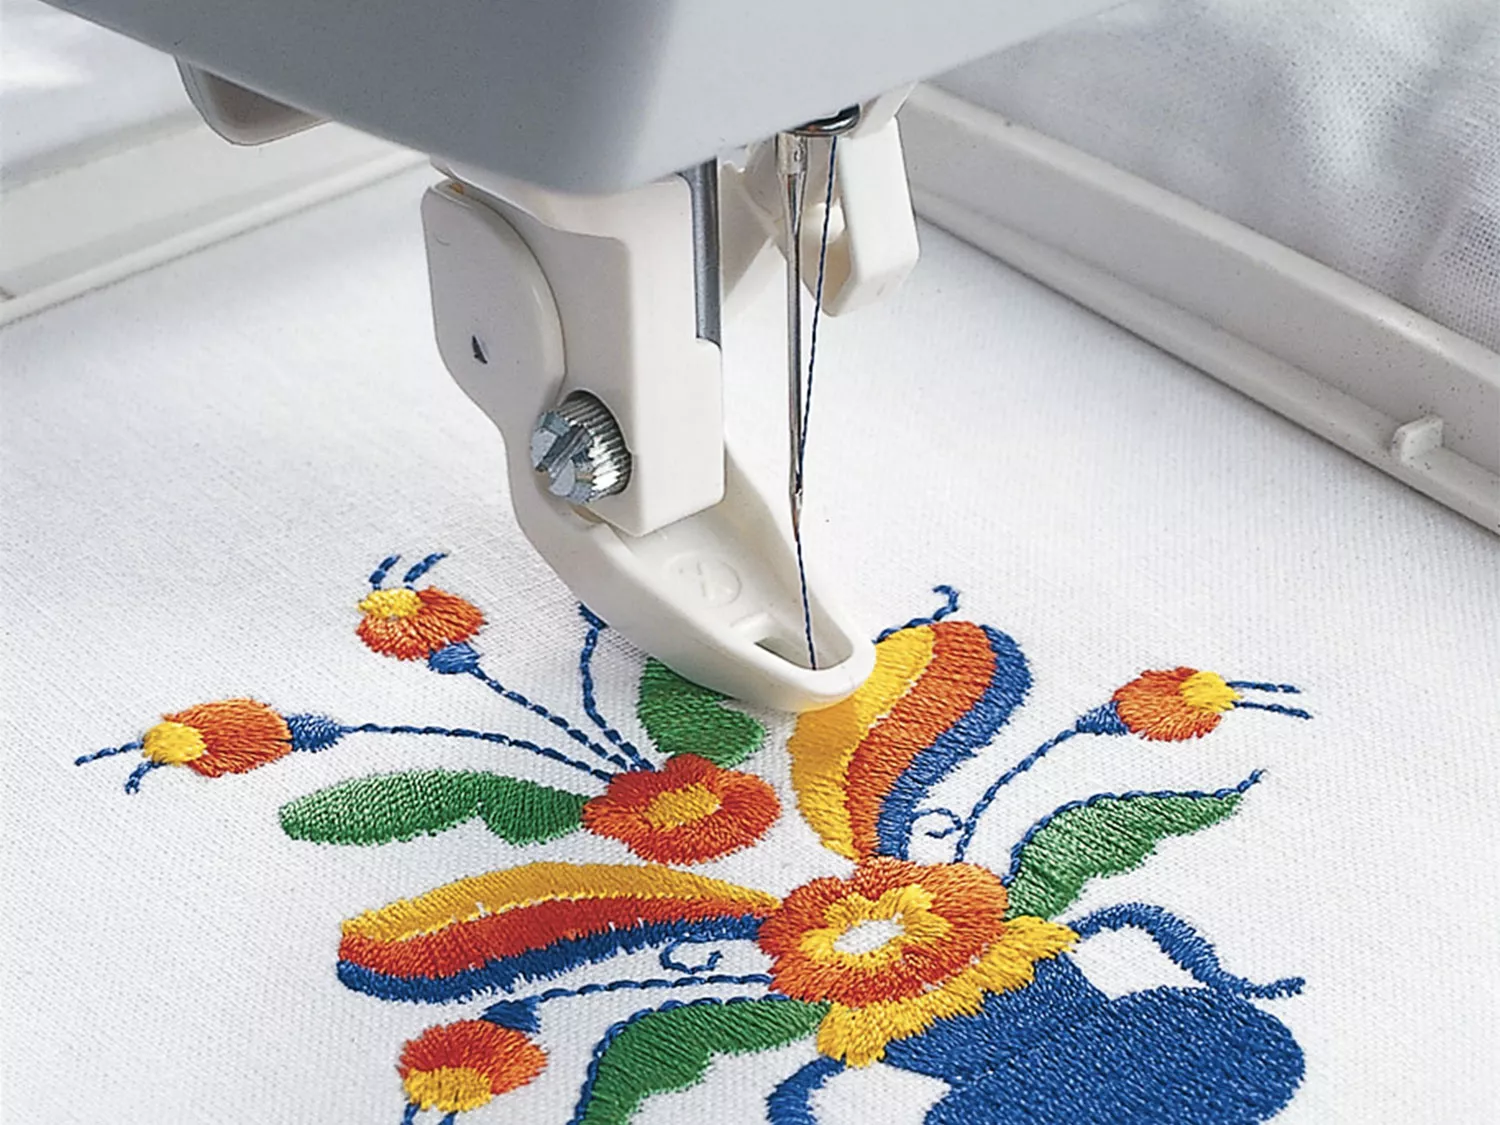 Embroidery elemarket